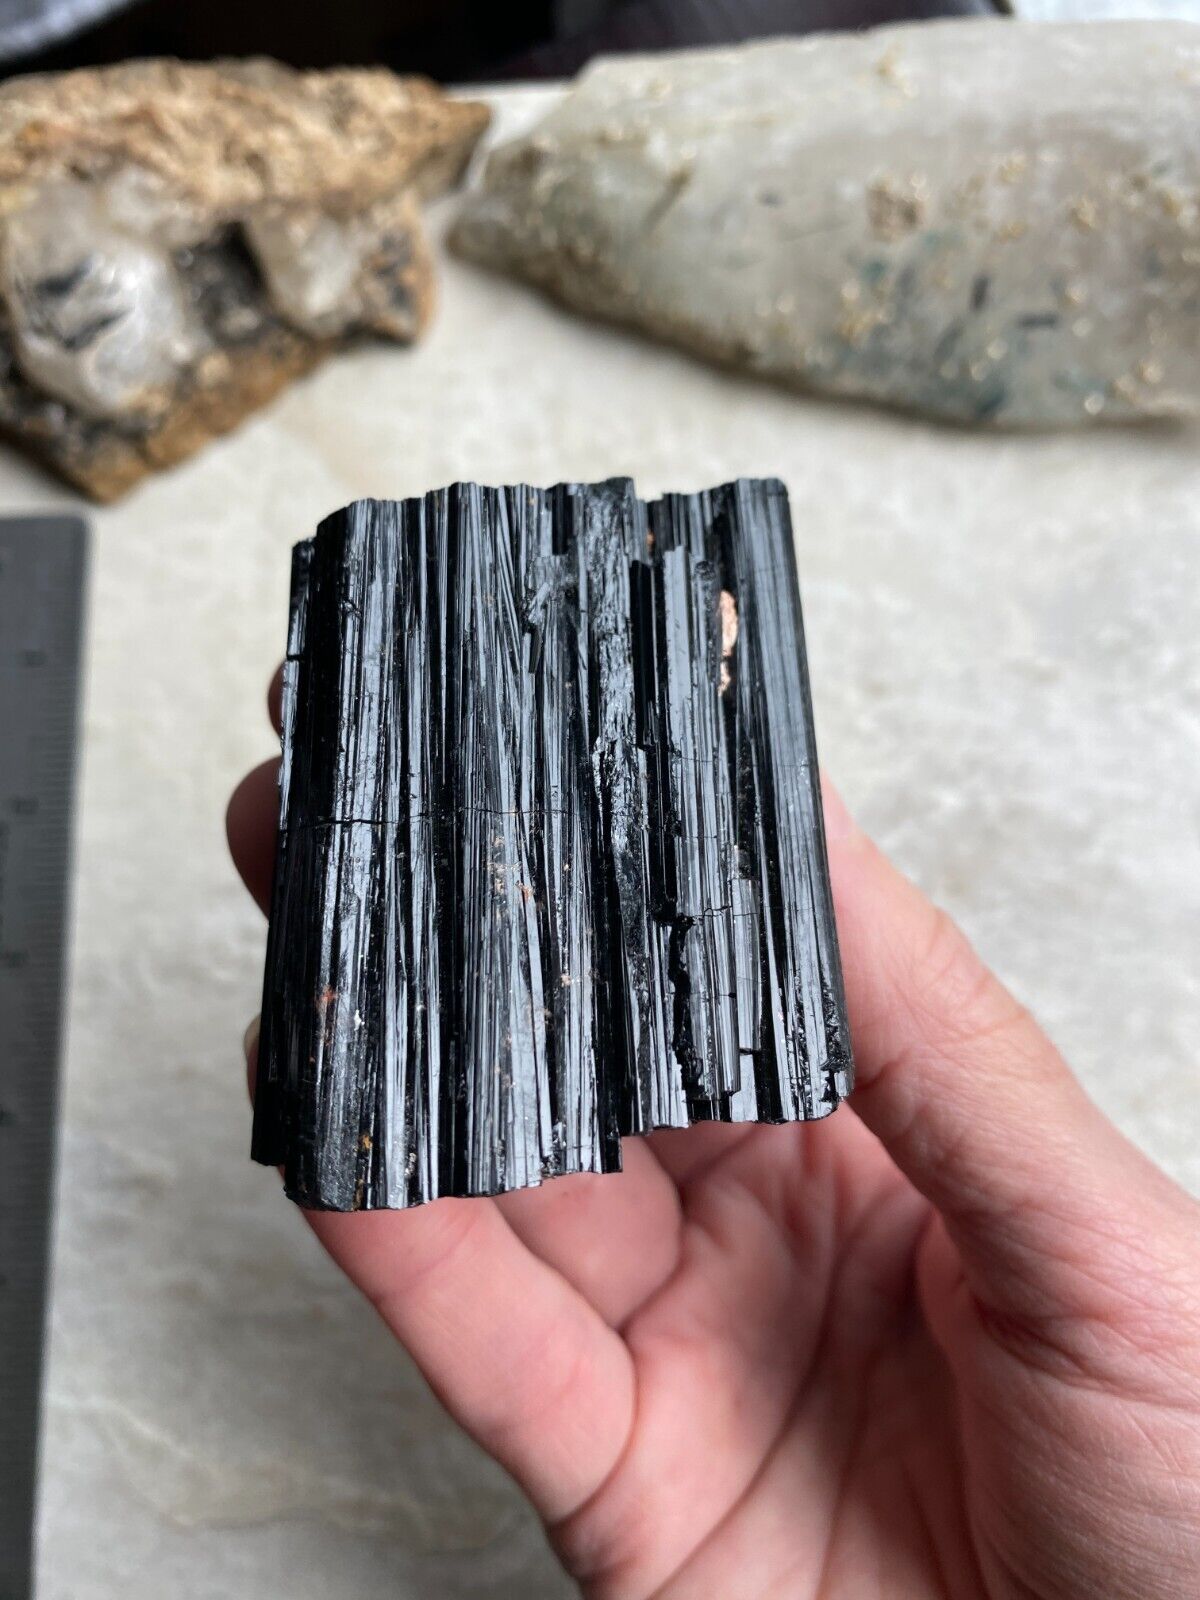 Black Tourmaline With Mica Crystals -Large Schorl Stones 147 Grams